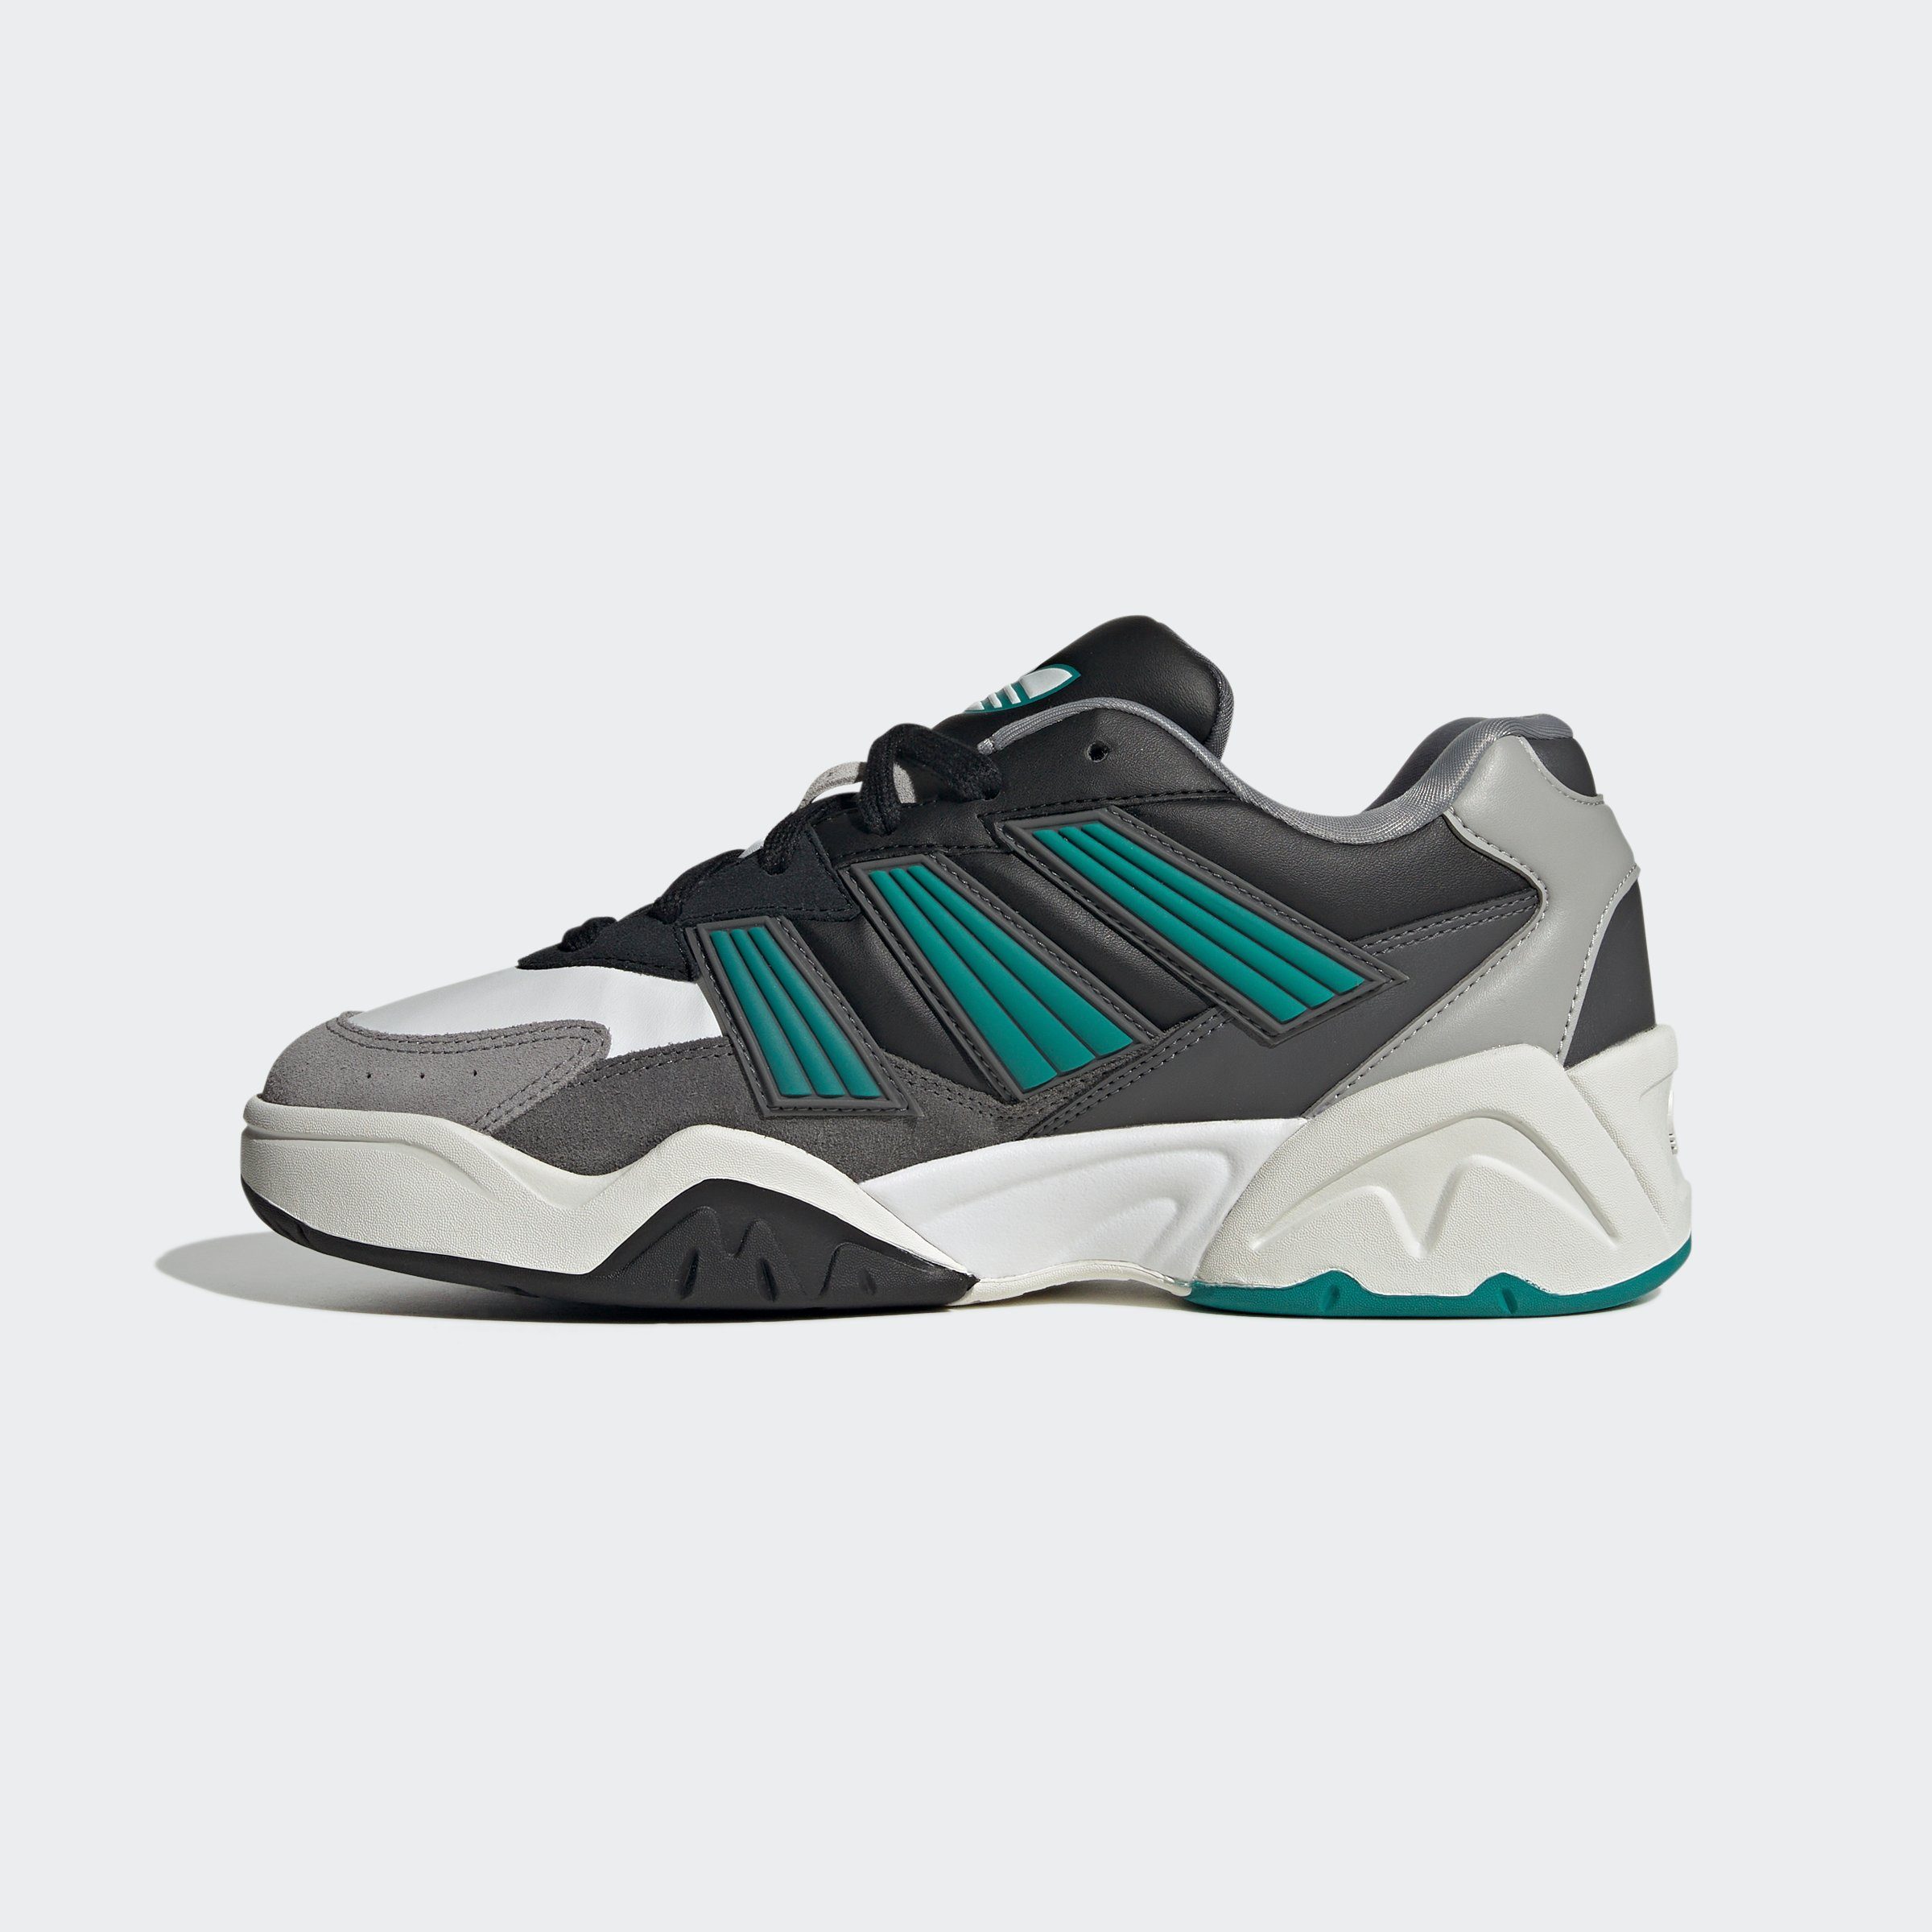 COURT MAGNETIC Eqt Originals adidas Green Sneaker / White / Crystal White Cloud